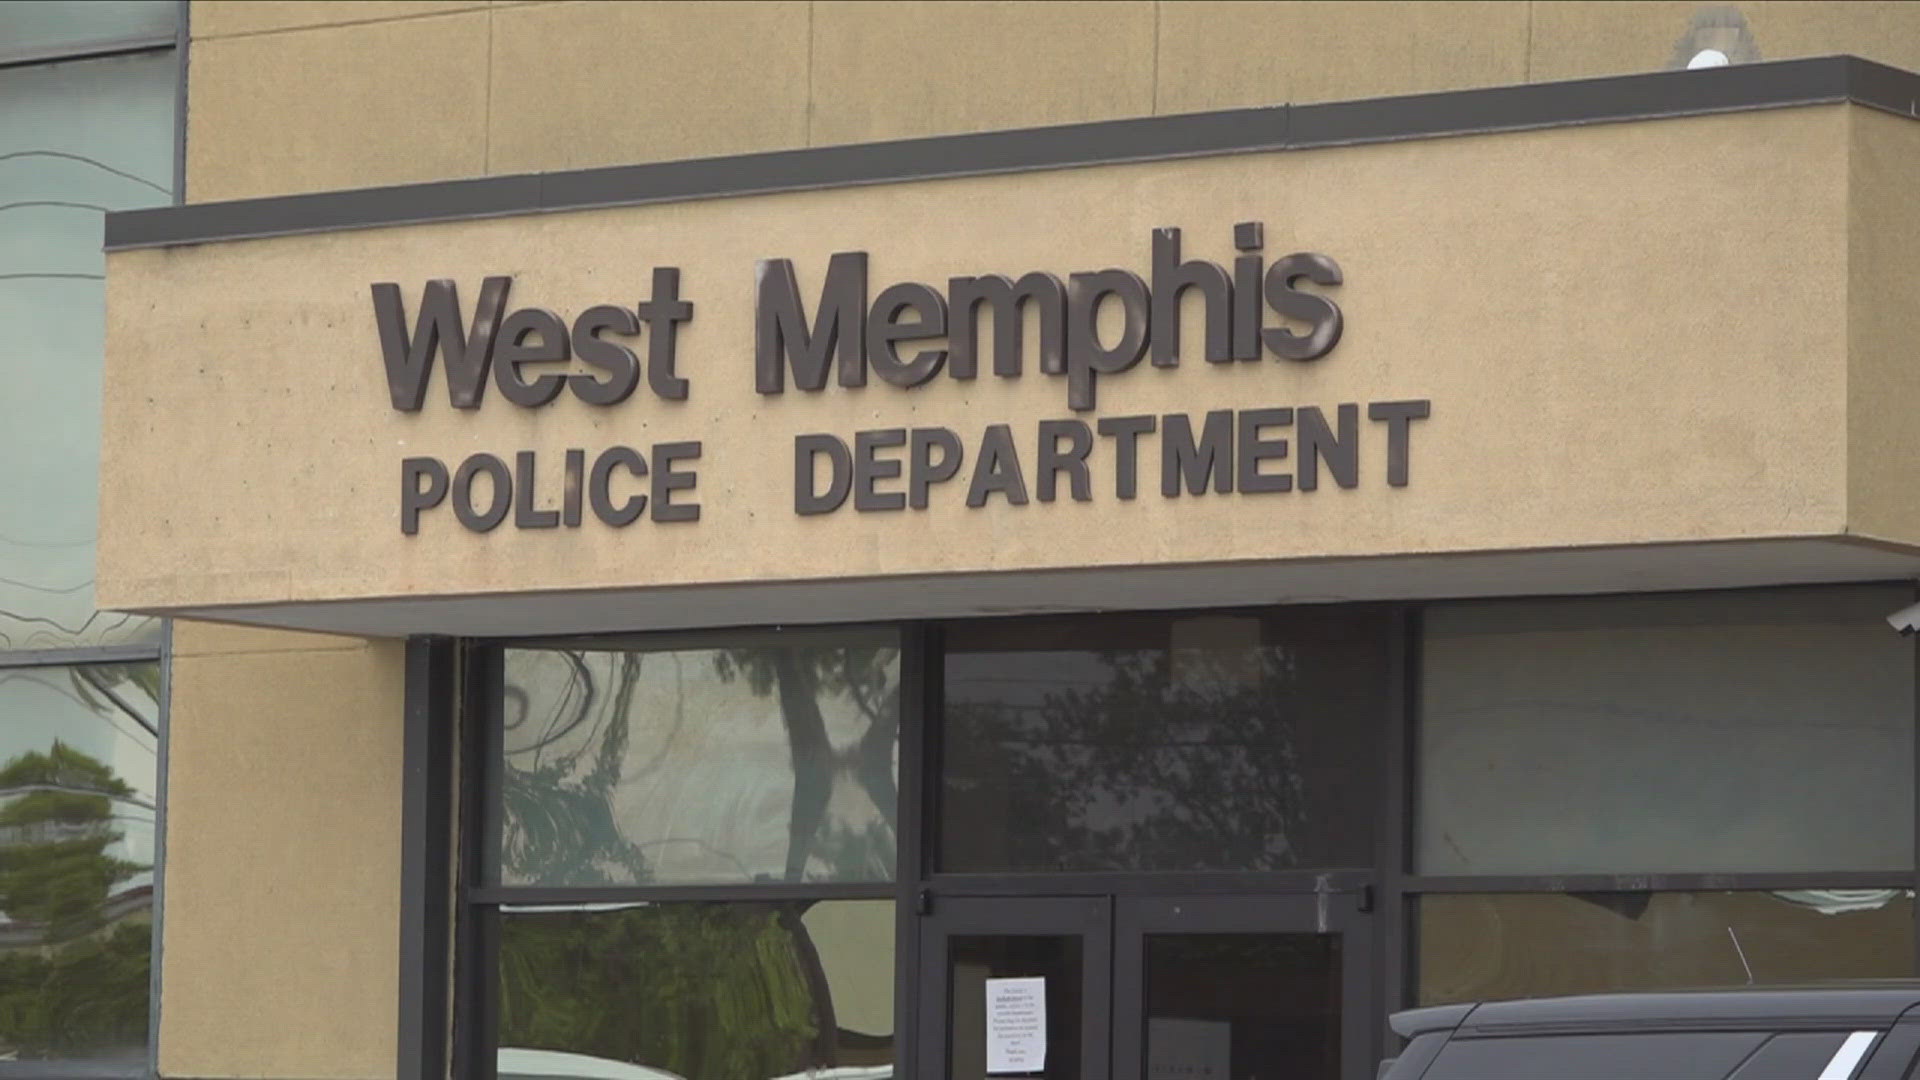 One woman told ABC24 there is a lack of transparency from the West Memphis Police Department when it comes to sharing important crime information.